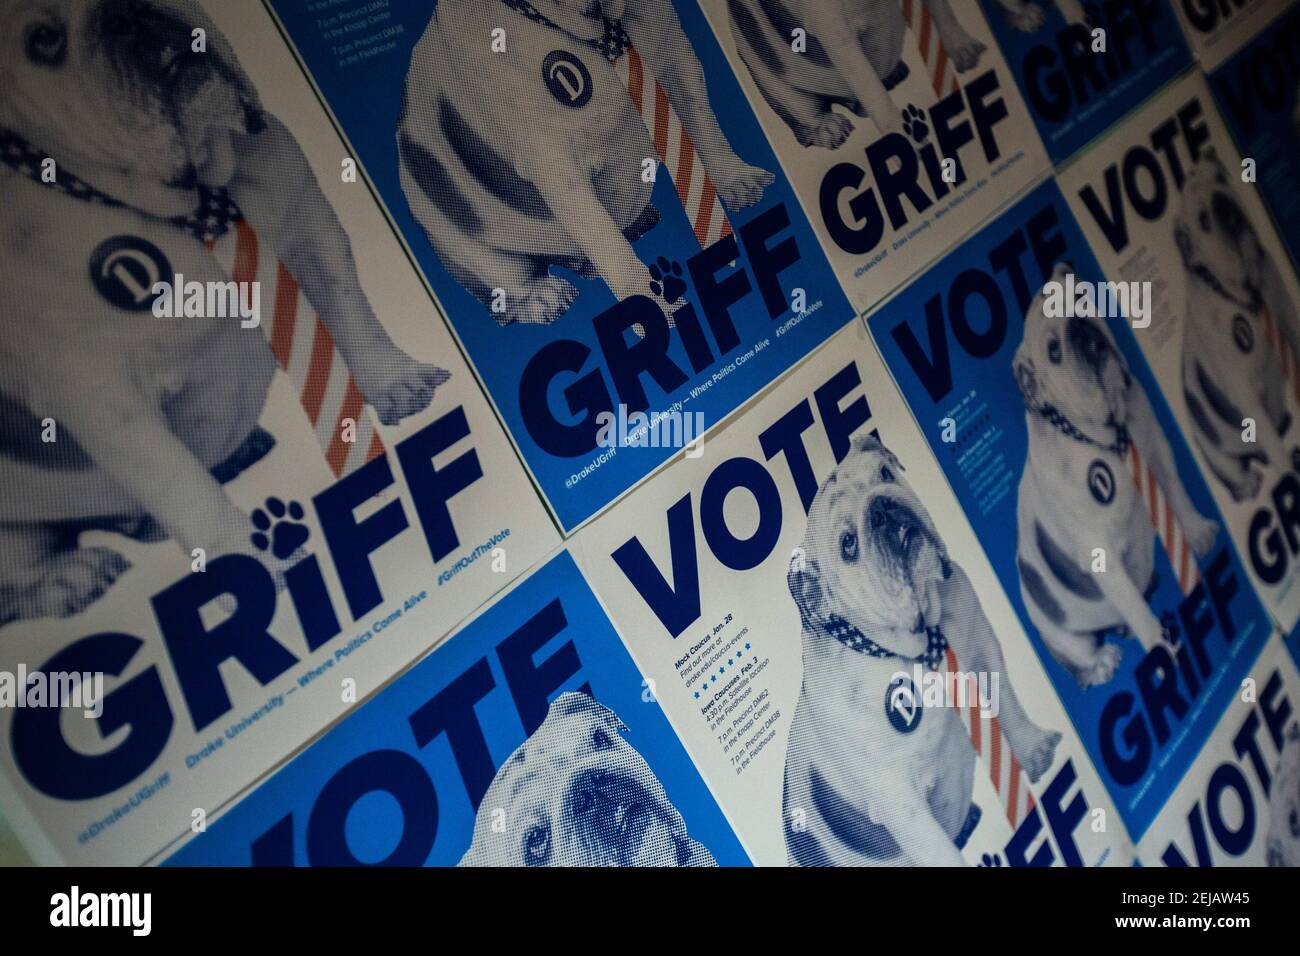 Posters featuring an image of Griff, the live mascot at Drake University, is seen during a watch the CNN/Des Moines Register Democratic Presidential Debate, Tuesday, Jan. 14, 2020, at Cartwright Hall on the Drake University campus in Des Moines, Iowa. 200114 Iowa Debate 025 Jpg (Photo by Joseph Cress/Iowa City Press-Citizen/Imagn/USA Today Network/Sipa USA) Stock Photo